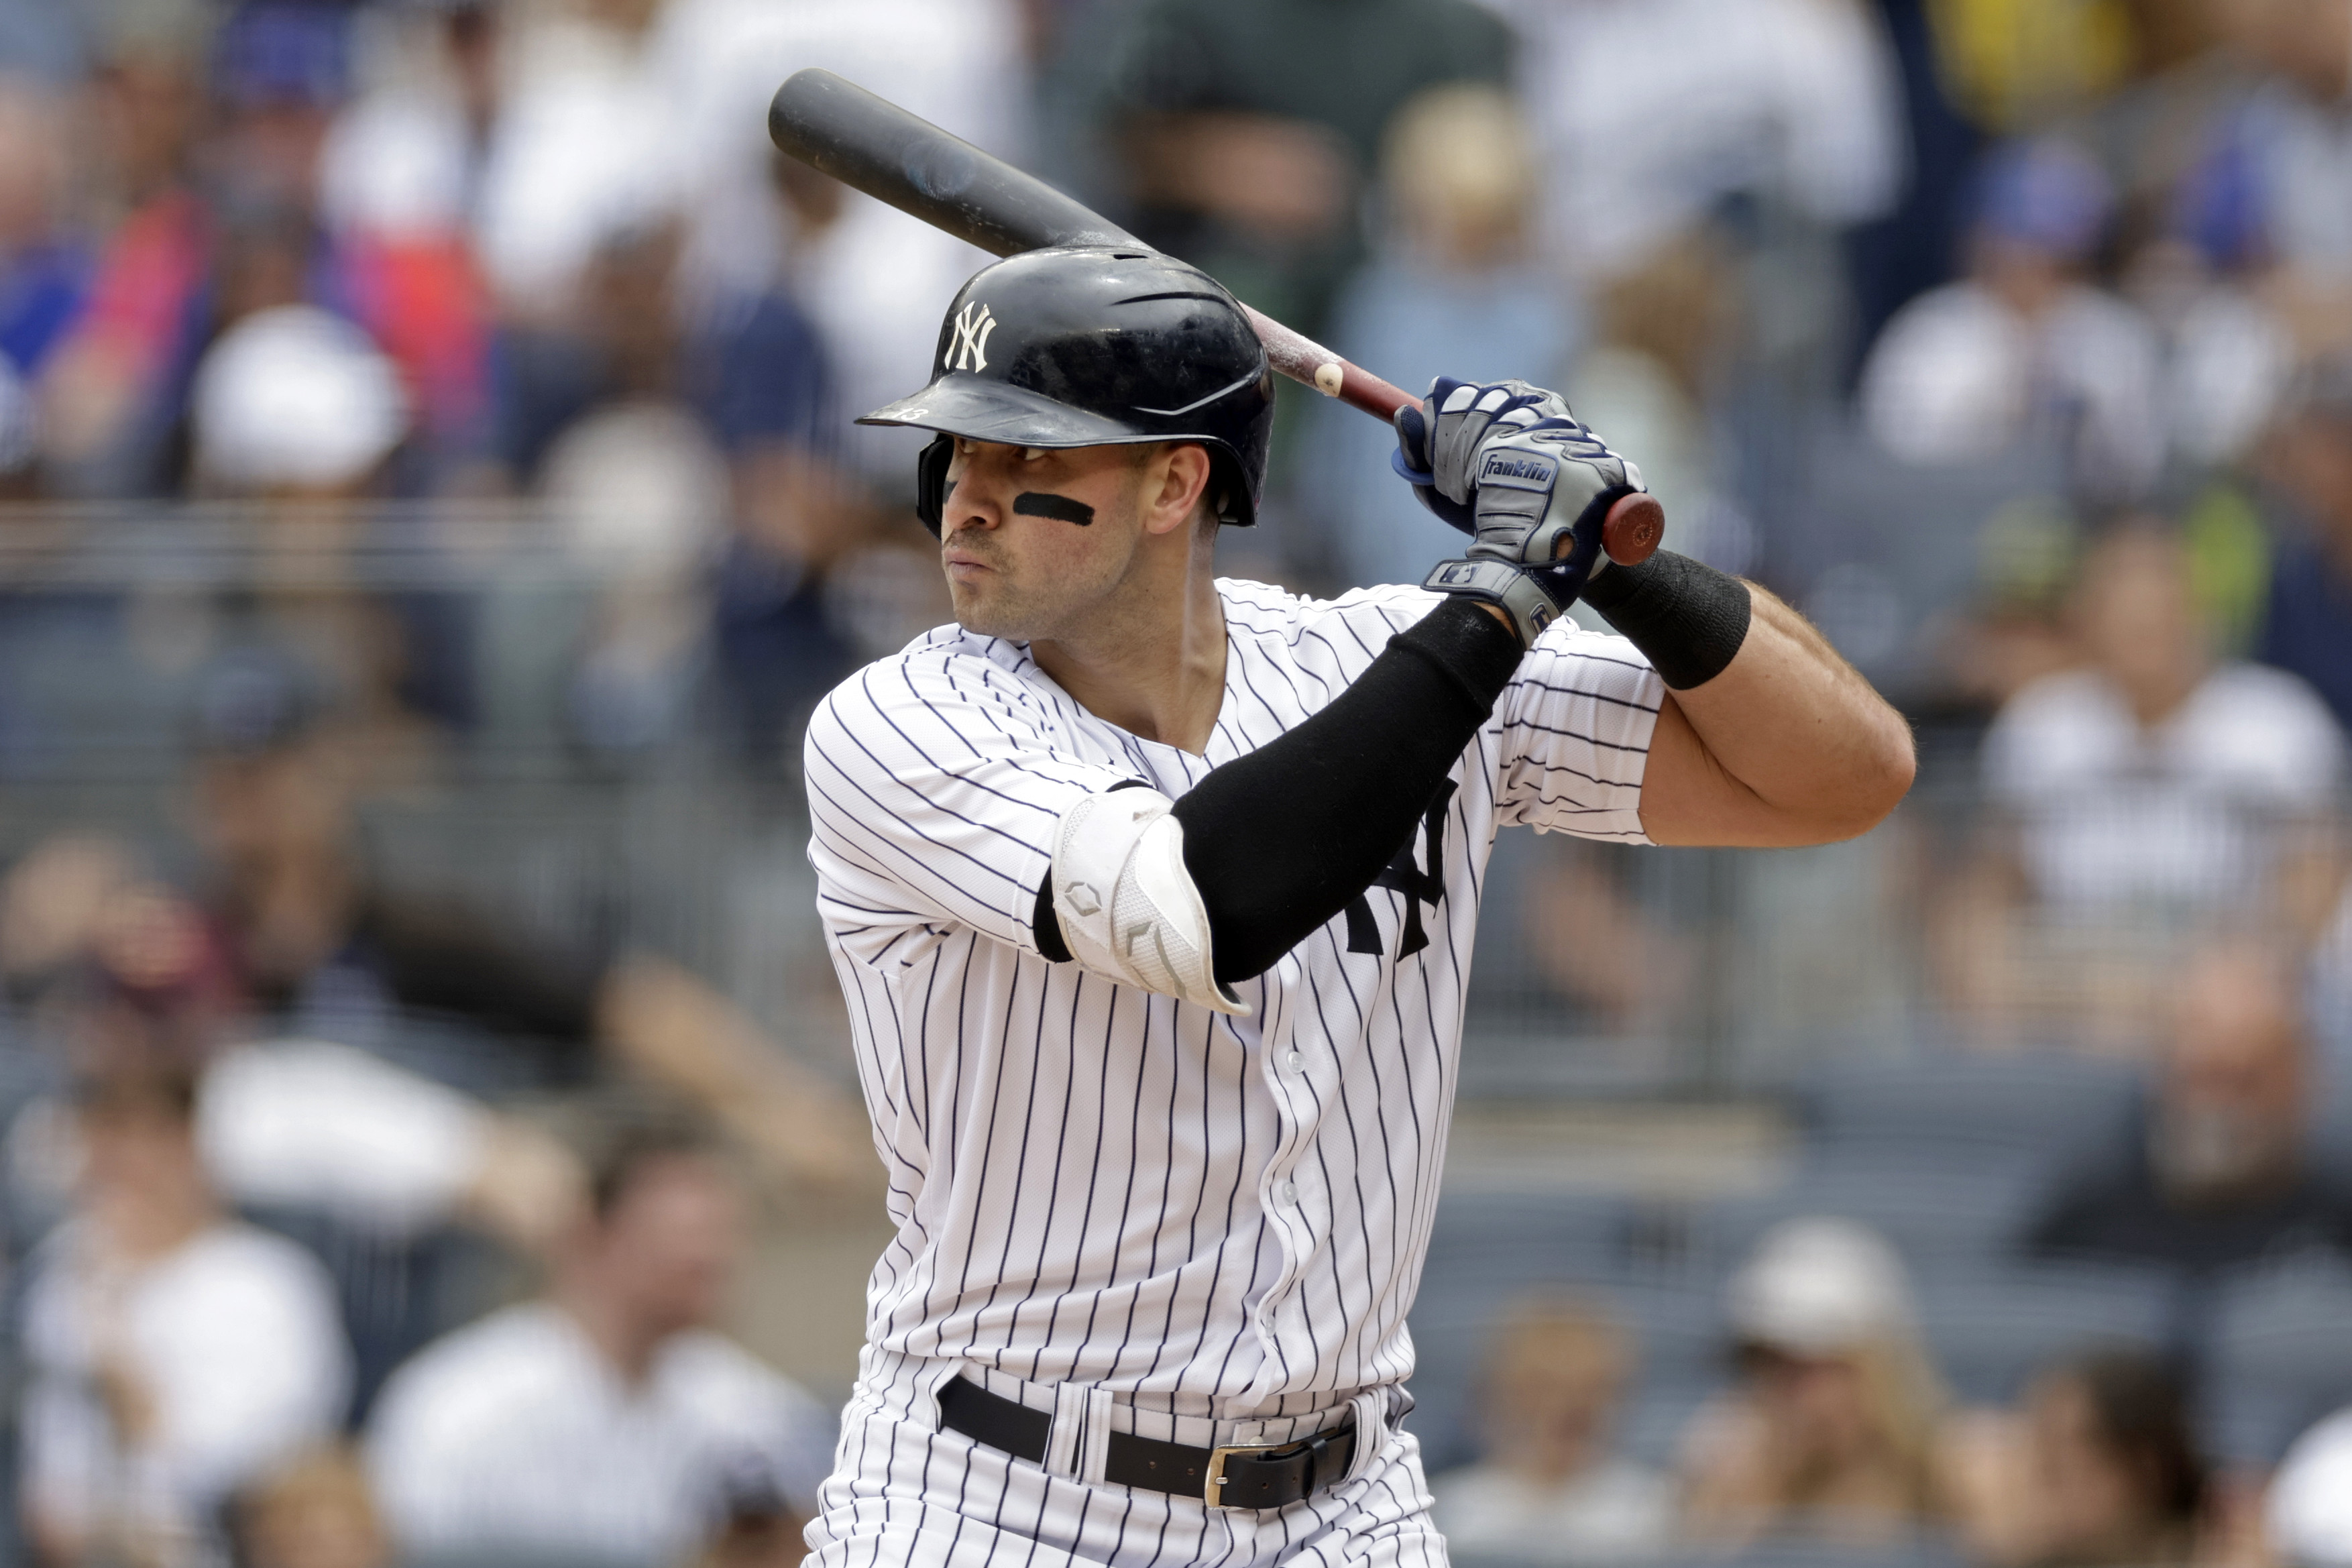 Yankees Slugger Reportedly Could Be Traded This Offseason